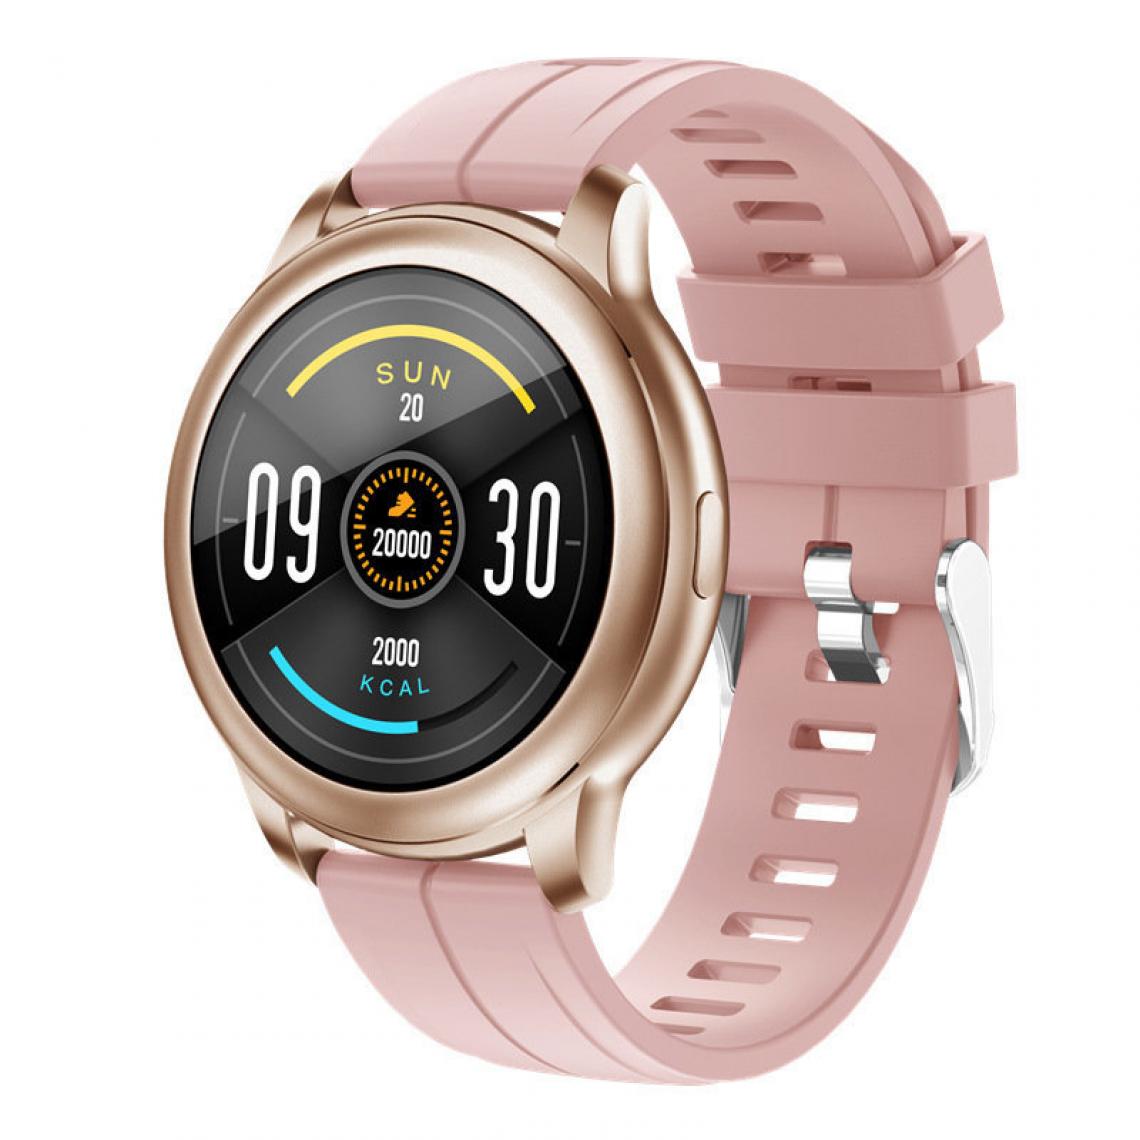 Chronotech Montres - Chronus Connected Watch, Round Waterproof IP67, Smart Watch with Heart Rate and Sleep, Calories, Stopwatch, Smart Watch Fitness Tracker for Android iOS(Pink) - Montre connectée